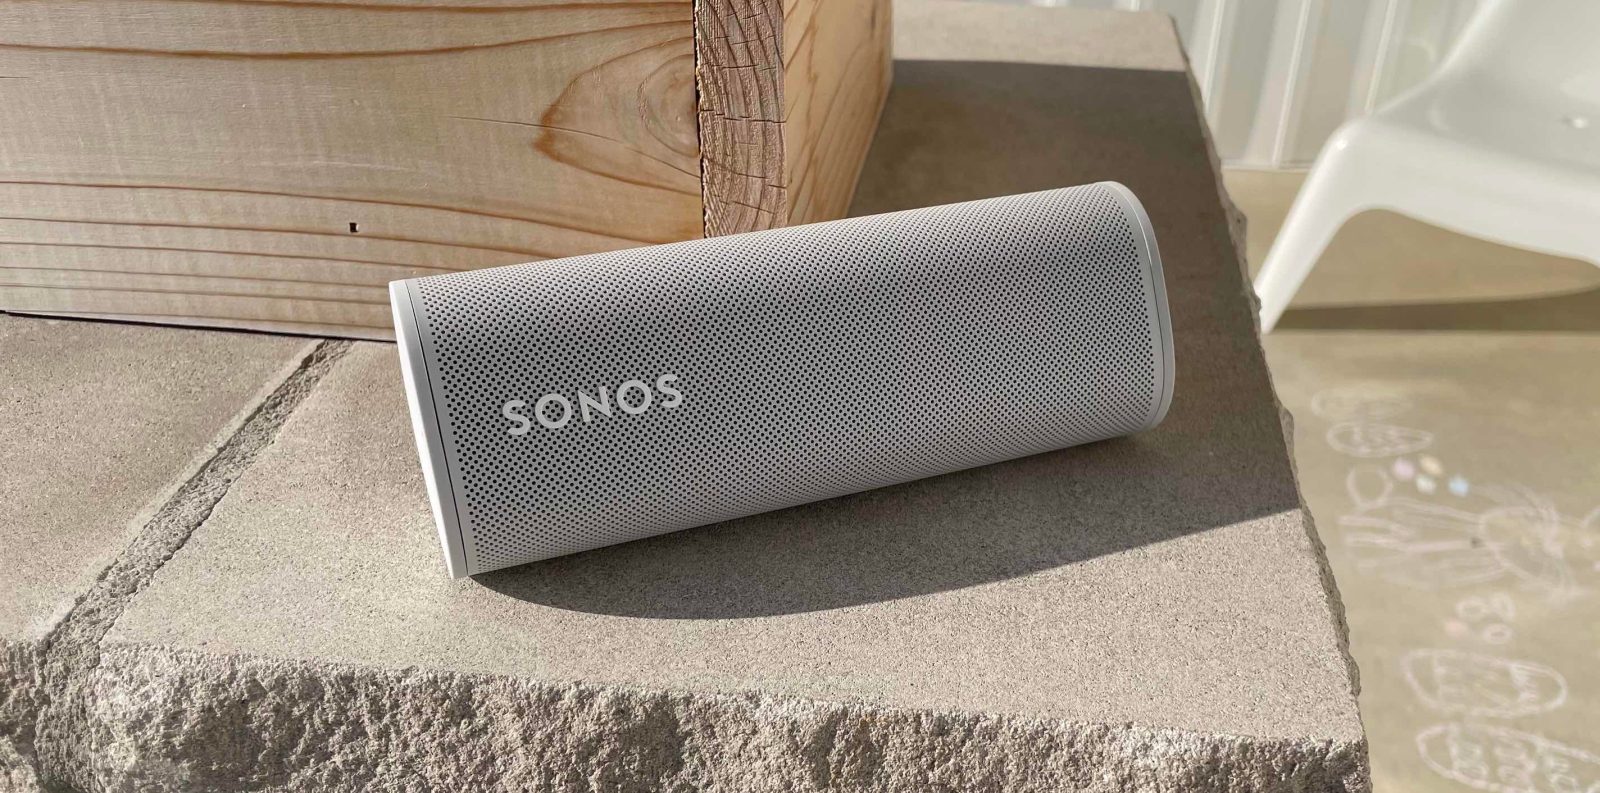 Sonos could before long declare a more modest, more reasonable Sub Mini subwoofer